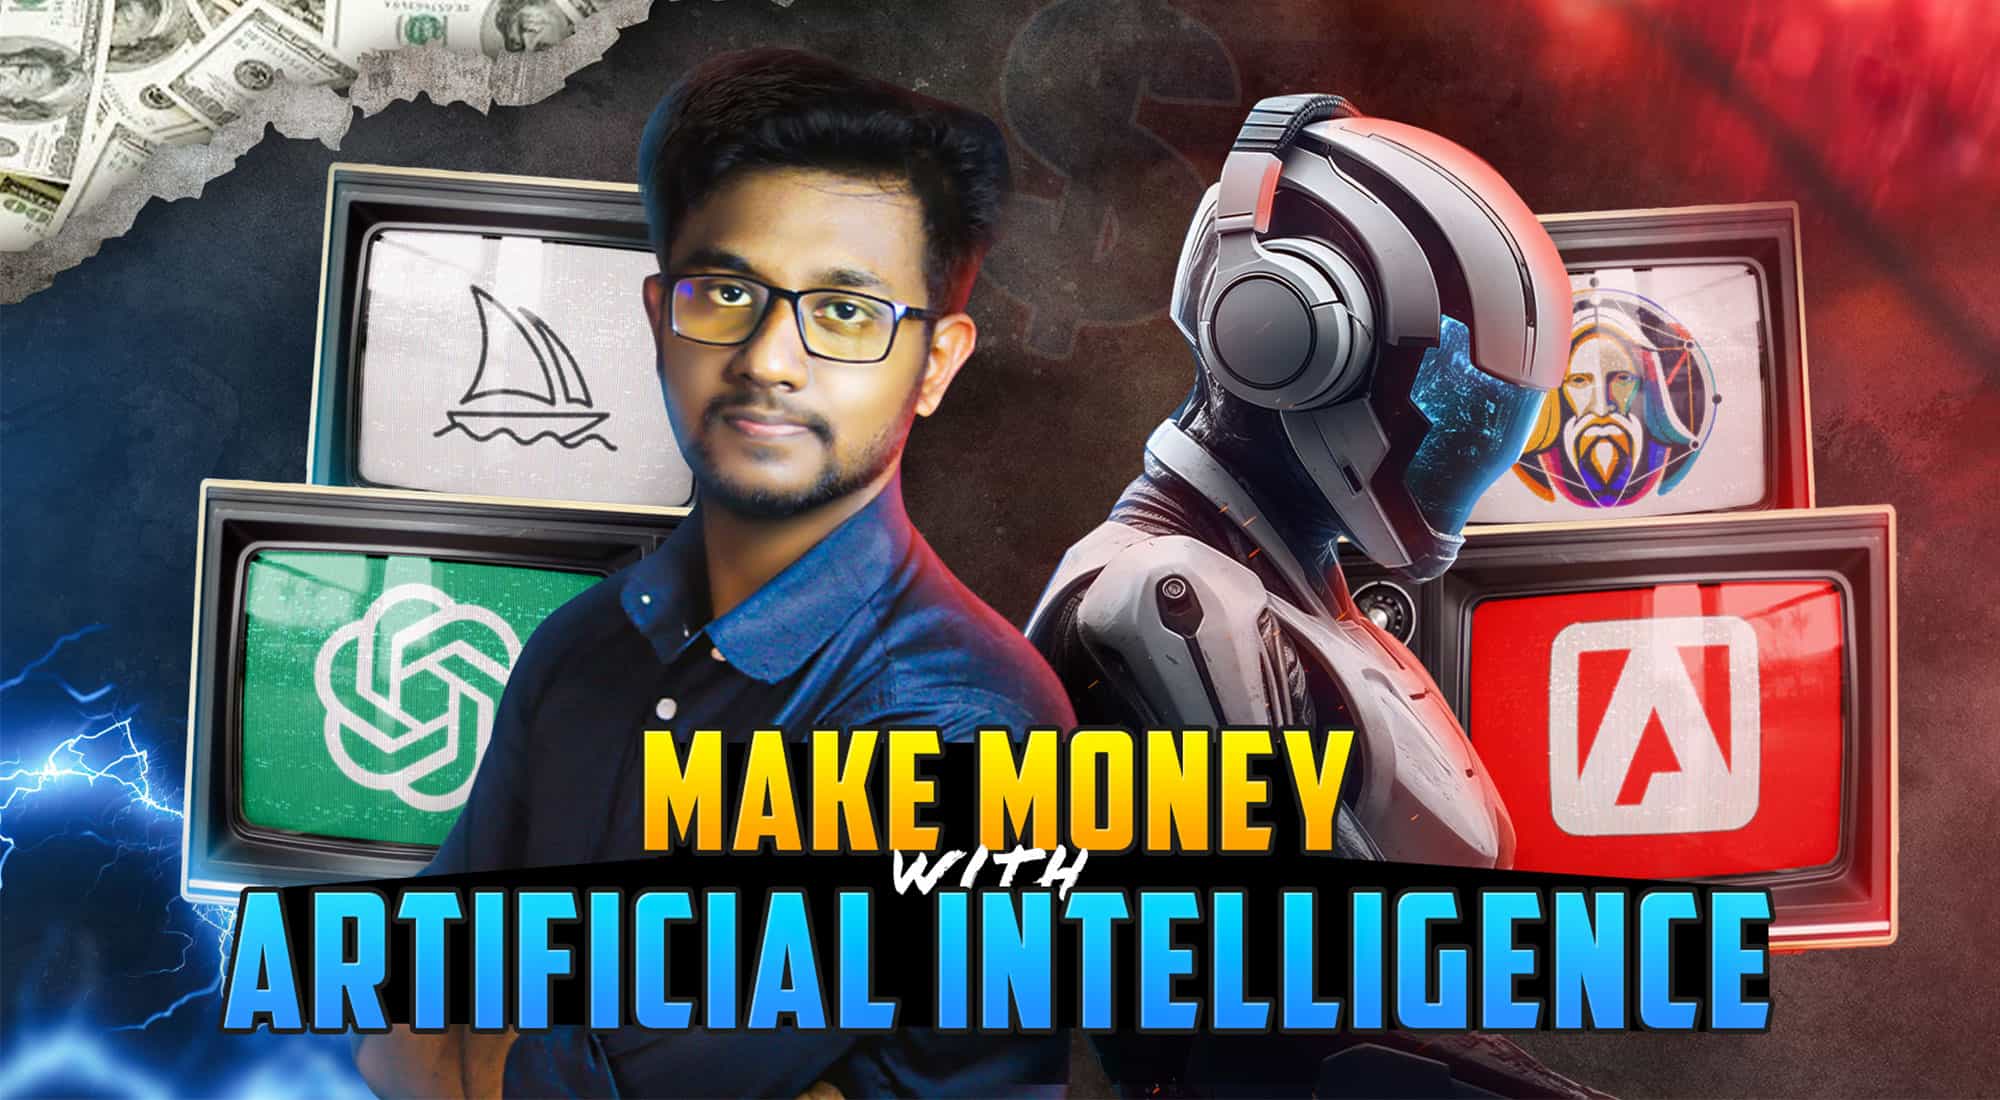 Master in Artificial Intelligence (AI) and Earn Money $$$ from Online